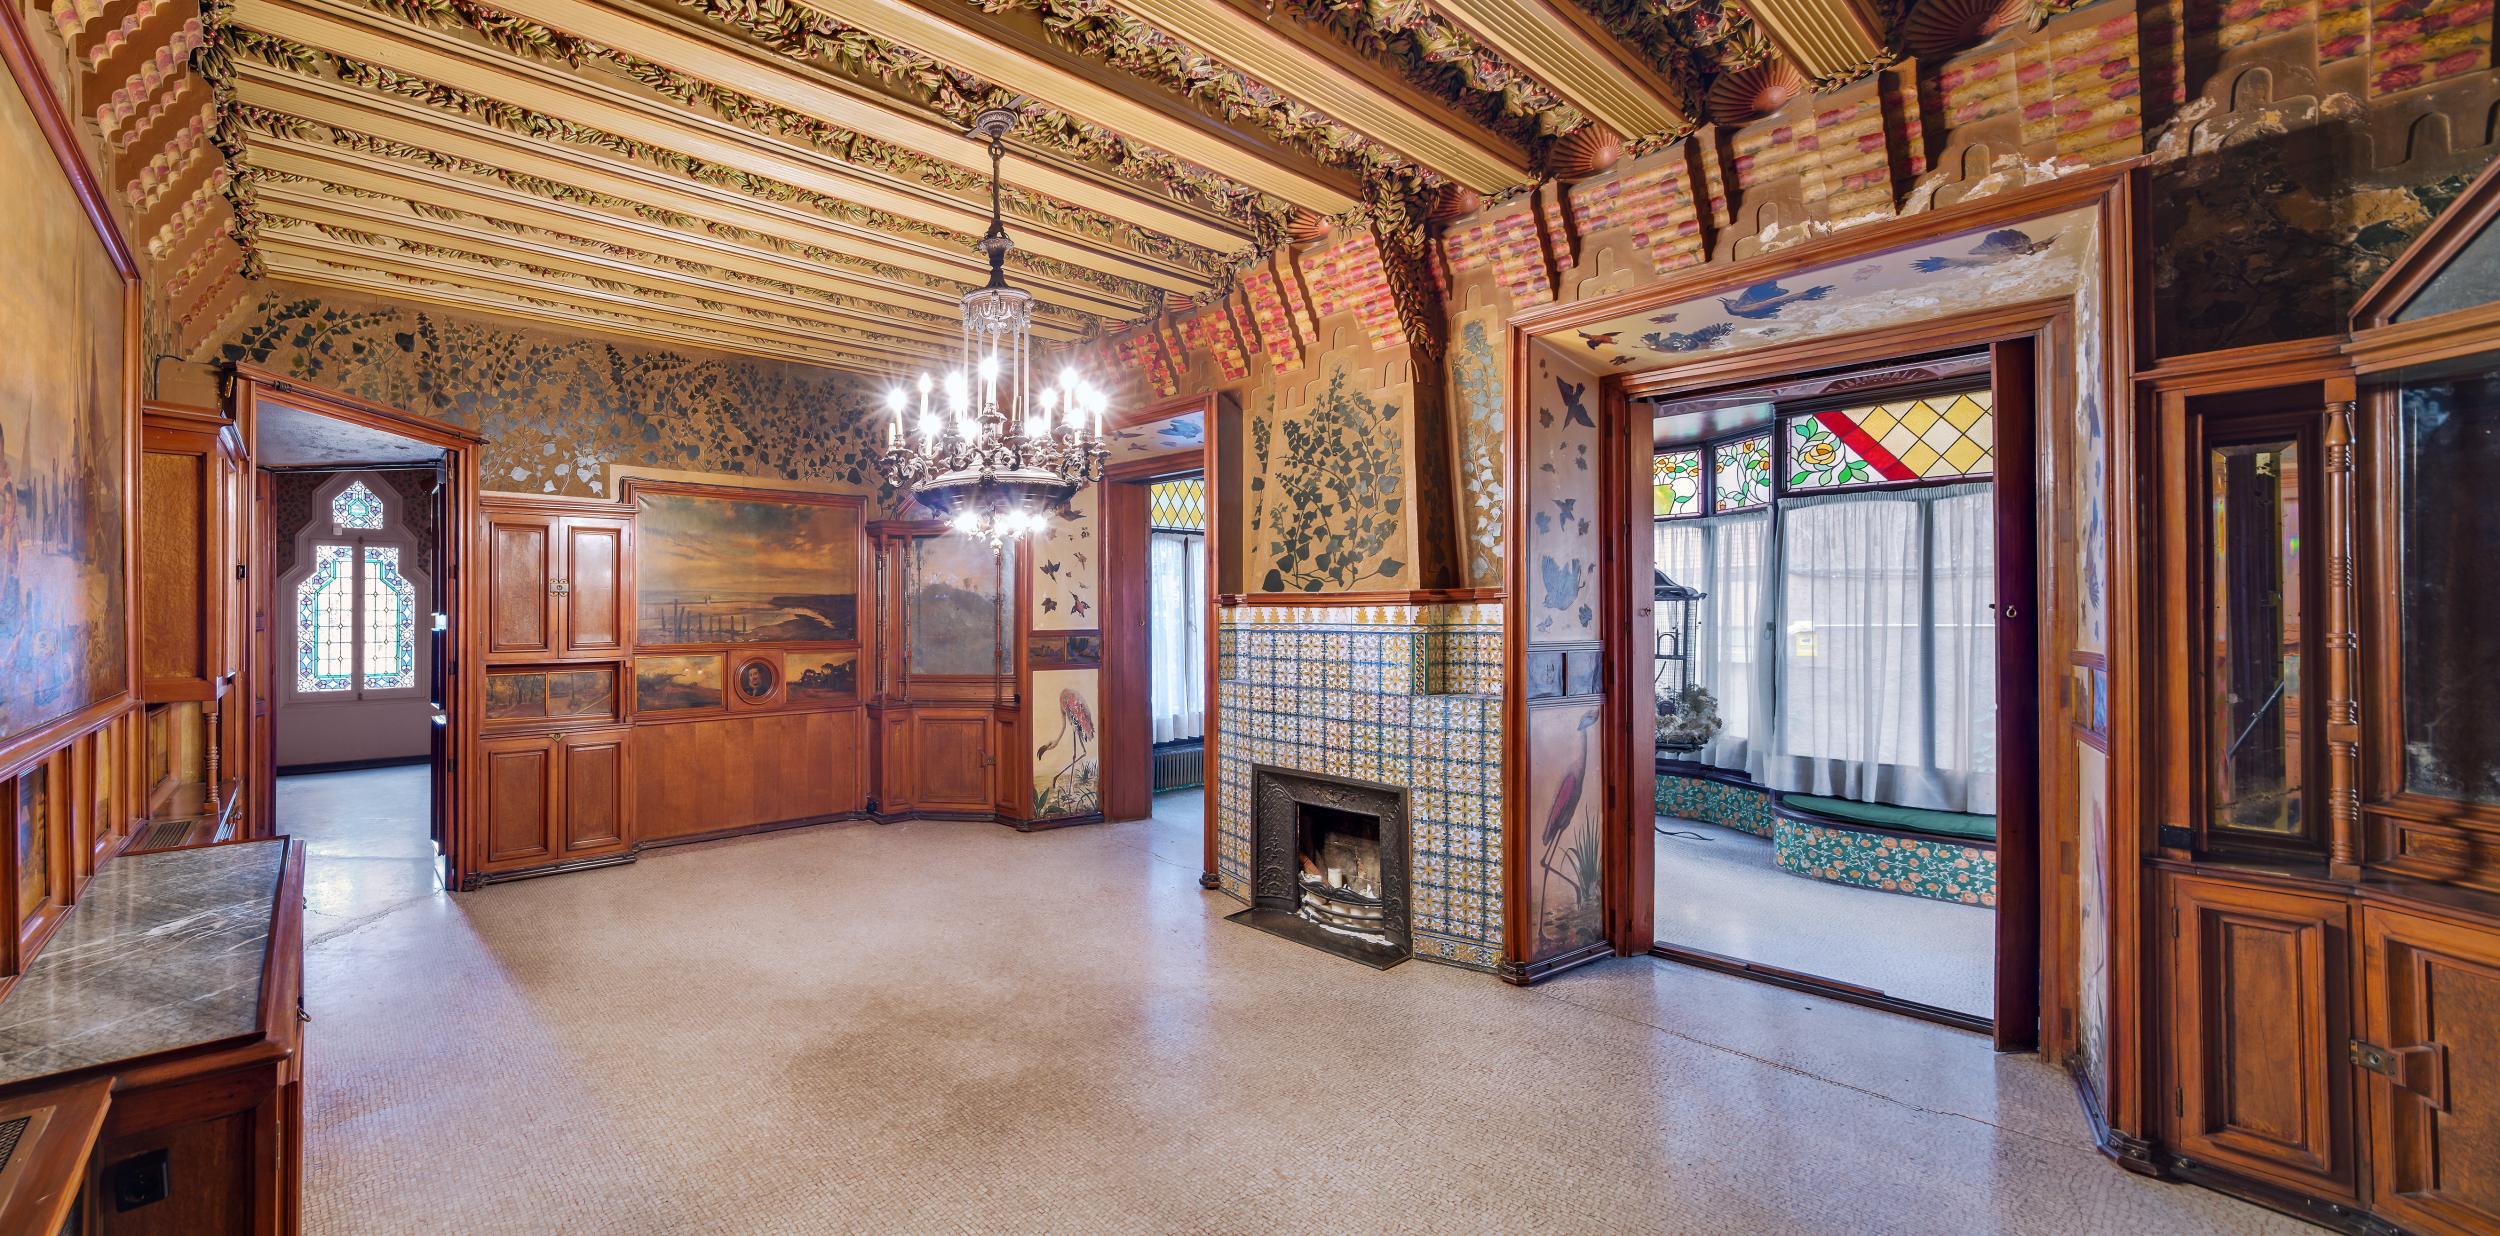 The interiors of Casa Vicens have been painstakingly restored